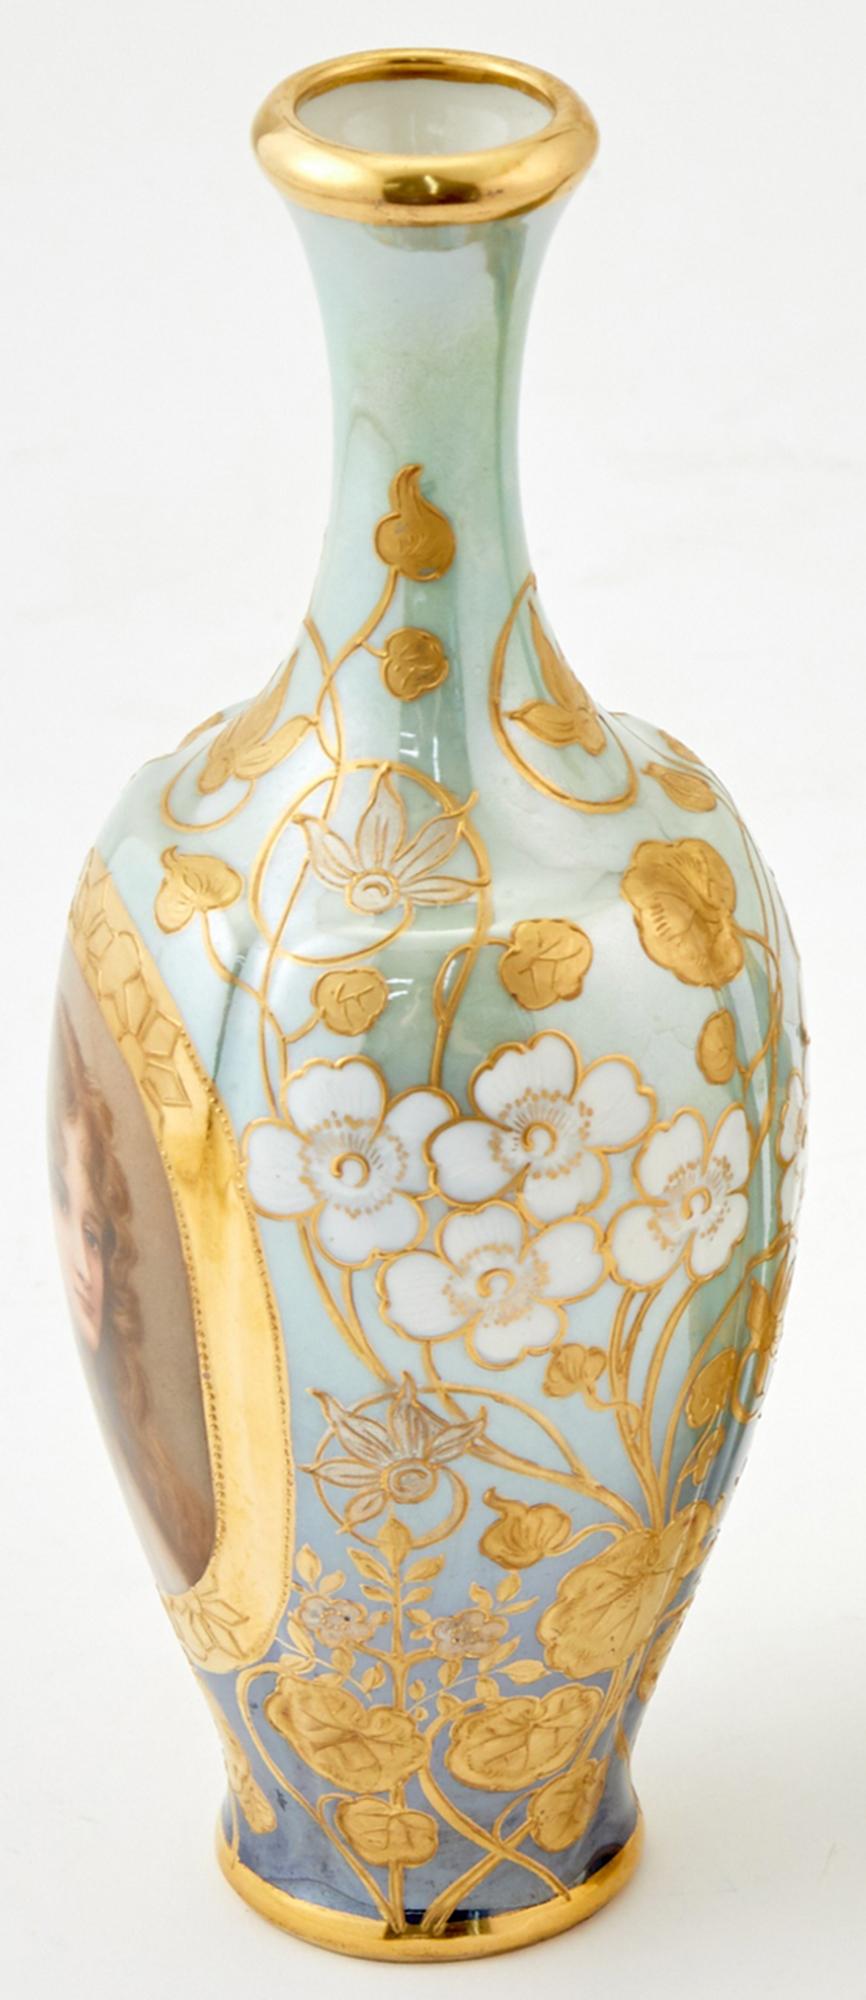 Fine royal Vienna portrait vase of a soft faced beauty with wispy hair, brown eyes and a neutral expression is encircled by a band of polychrome gold paint. Two tones of blue from the base and neck converge on the belly, creating a beautiful